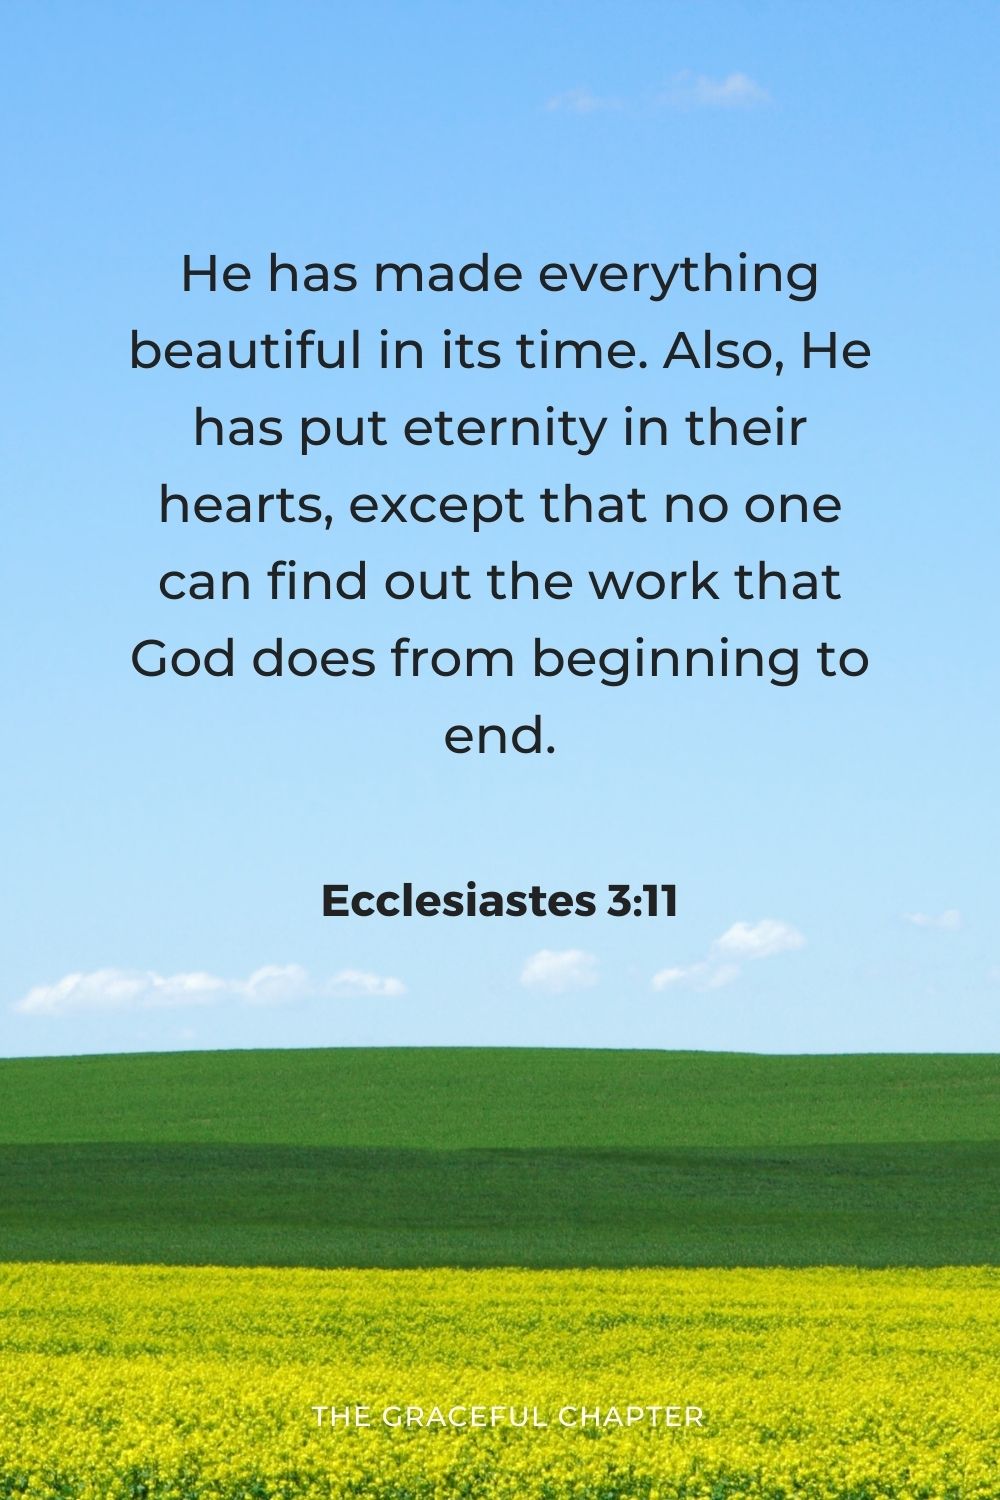 He has made everything beautiful in its time. Also, He has put eternity in their hearts, except that no one can find out the work that God does from beginning to end.